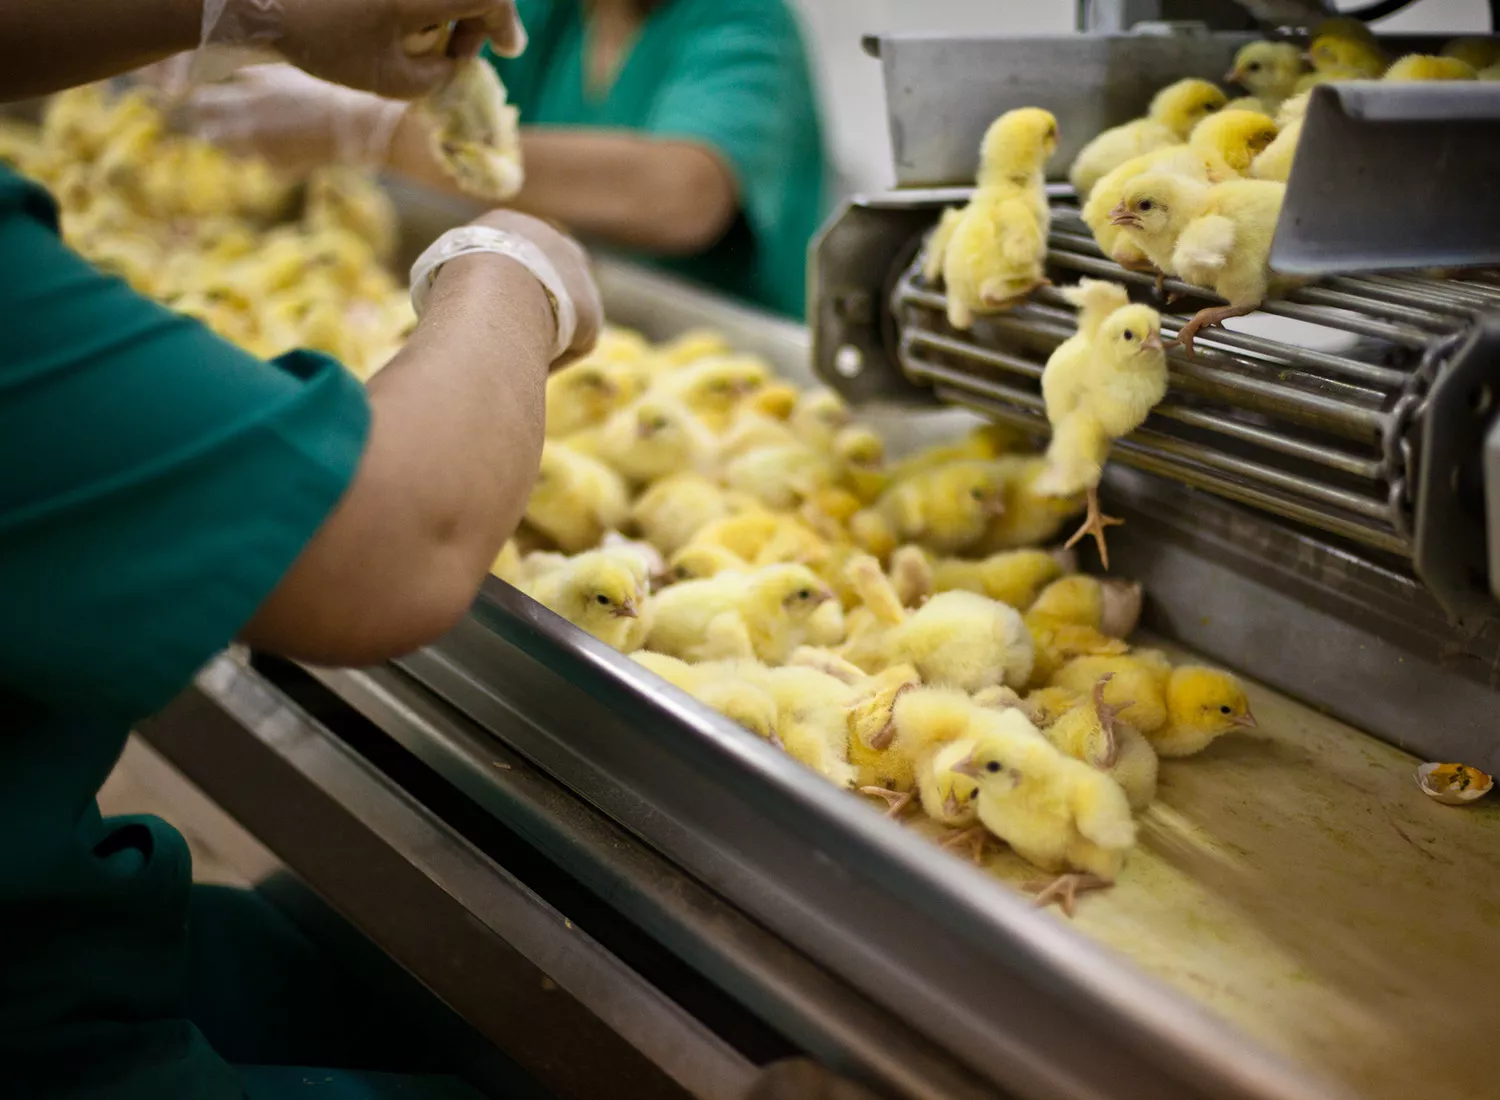 Workers separate the male chicks from the females. The males will be immediately killed.